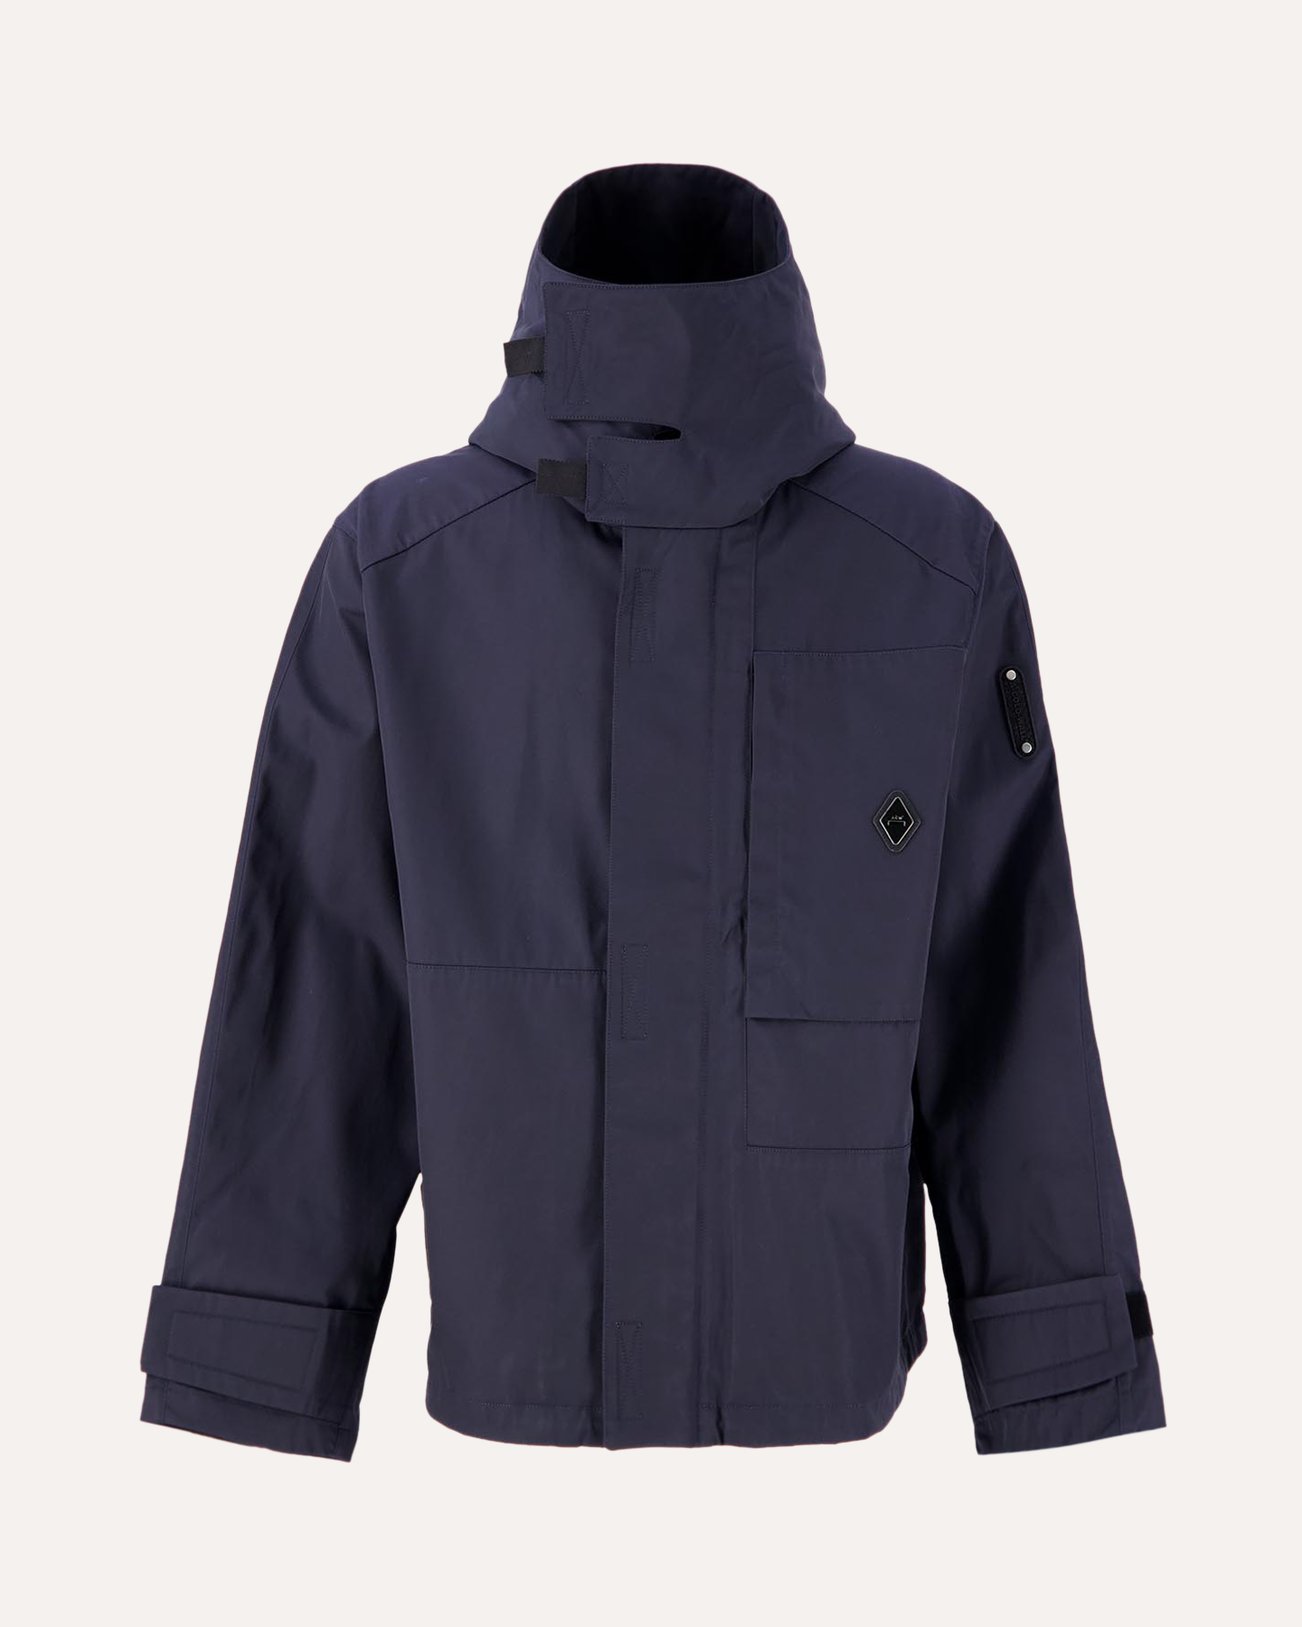 A-COLD-WALL* Gable Storm Jacket NAVY 1